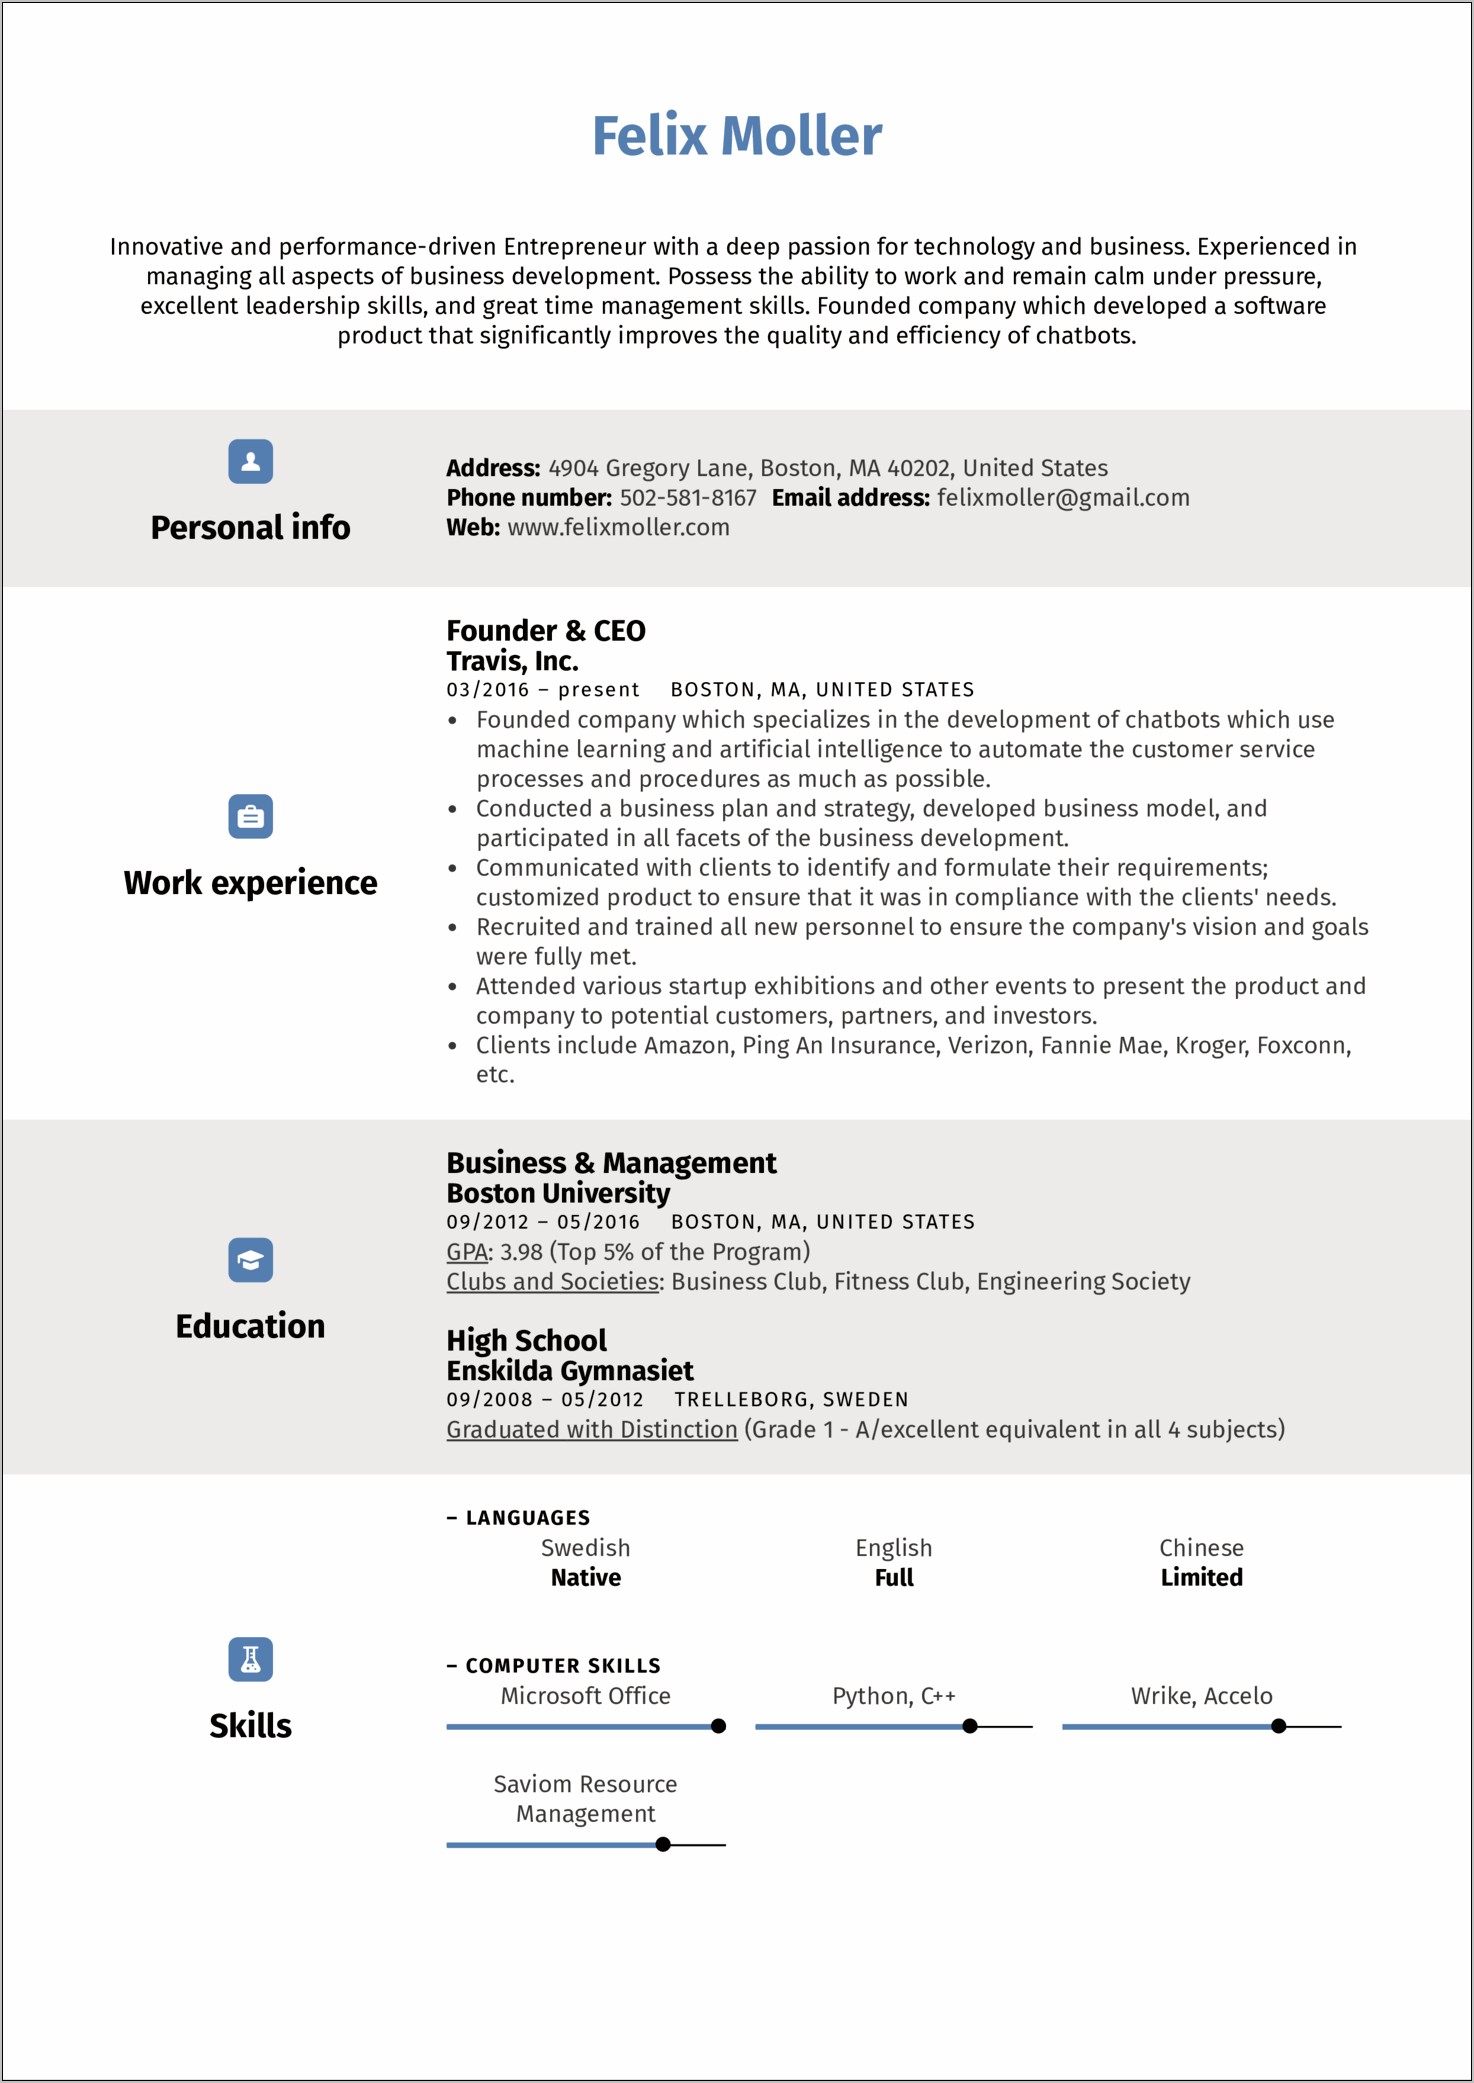 Examples Of Professional Skills Resume